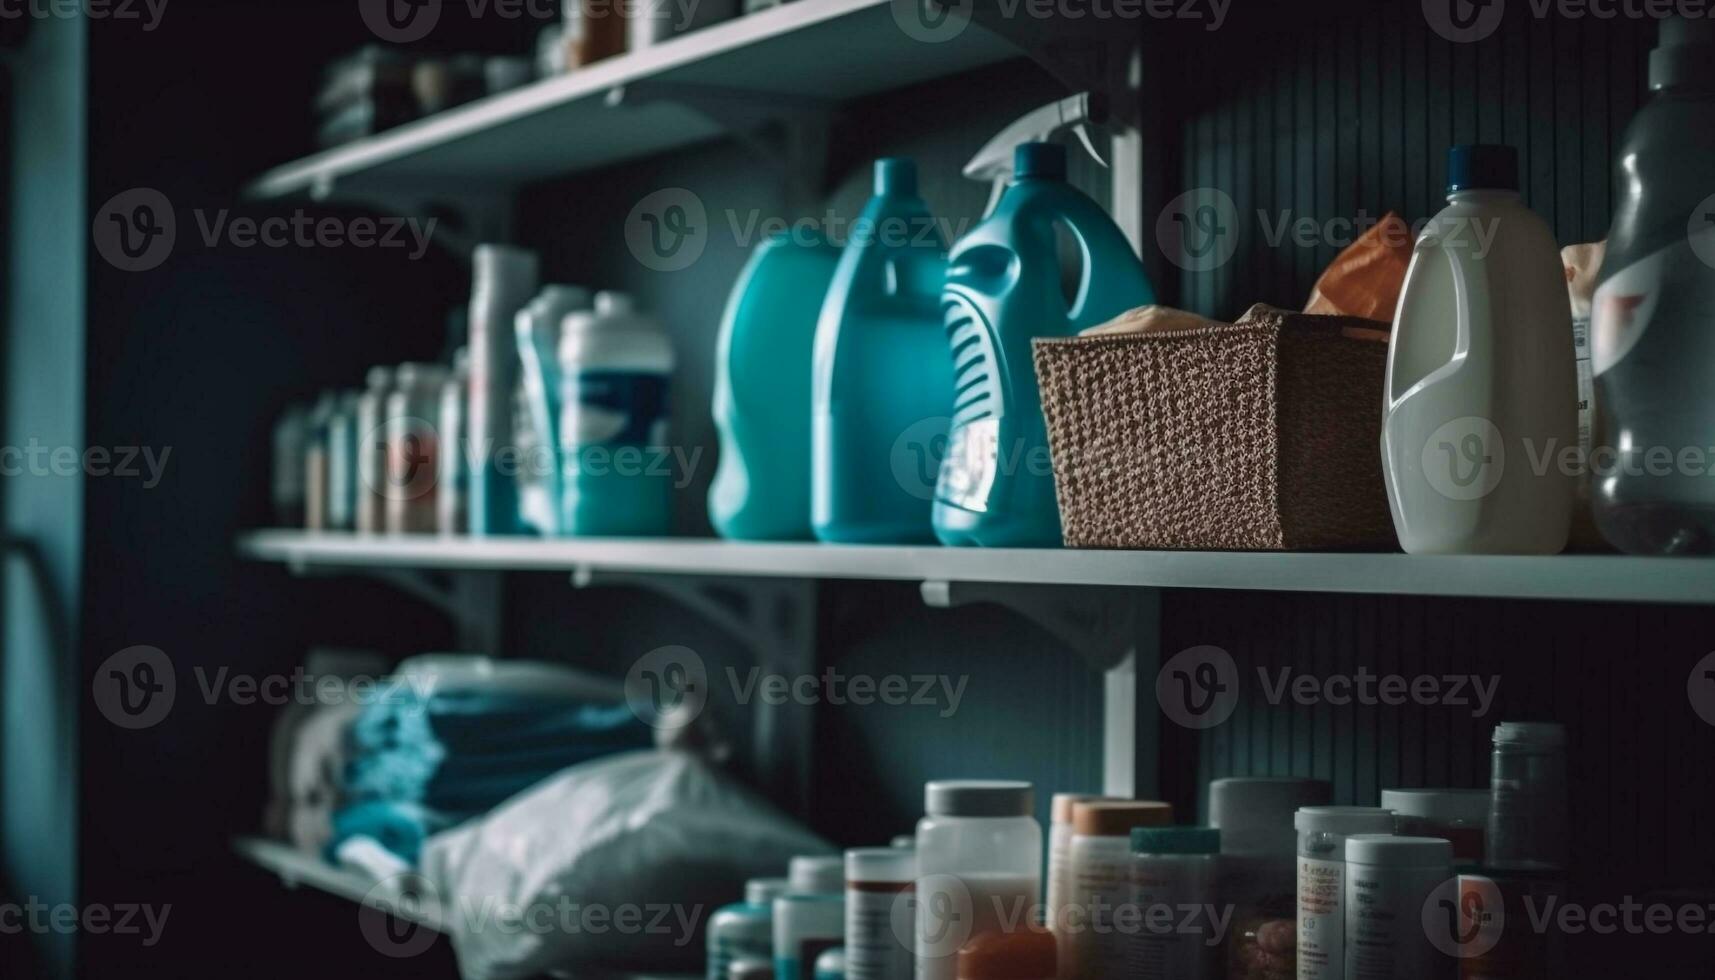 Neat arrangement of blue bottles on shelf generated by AI photo